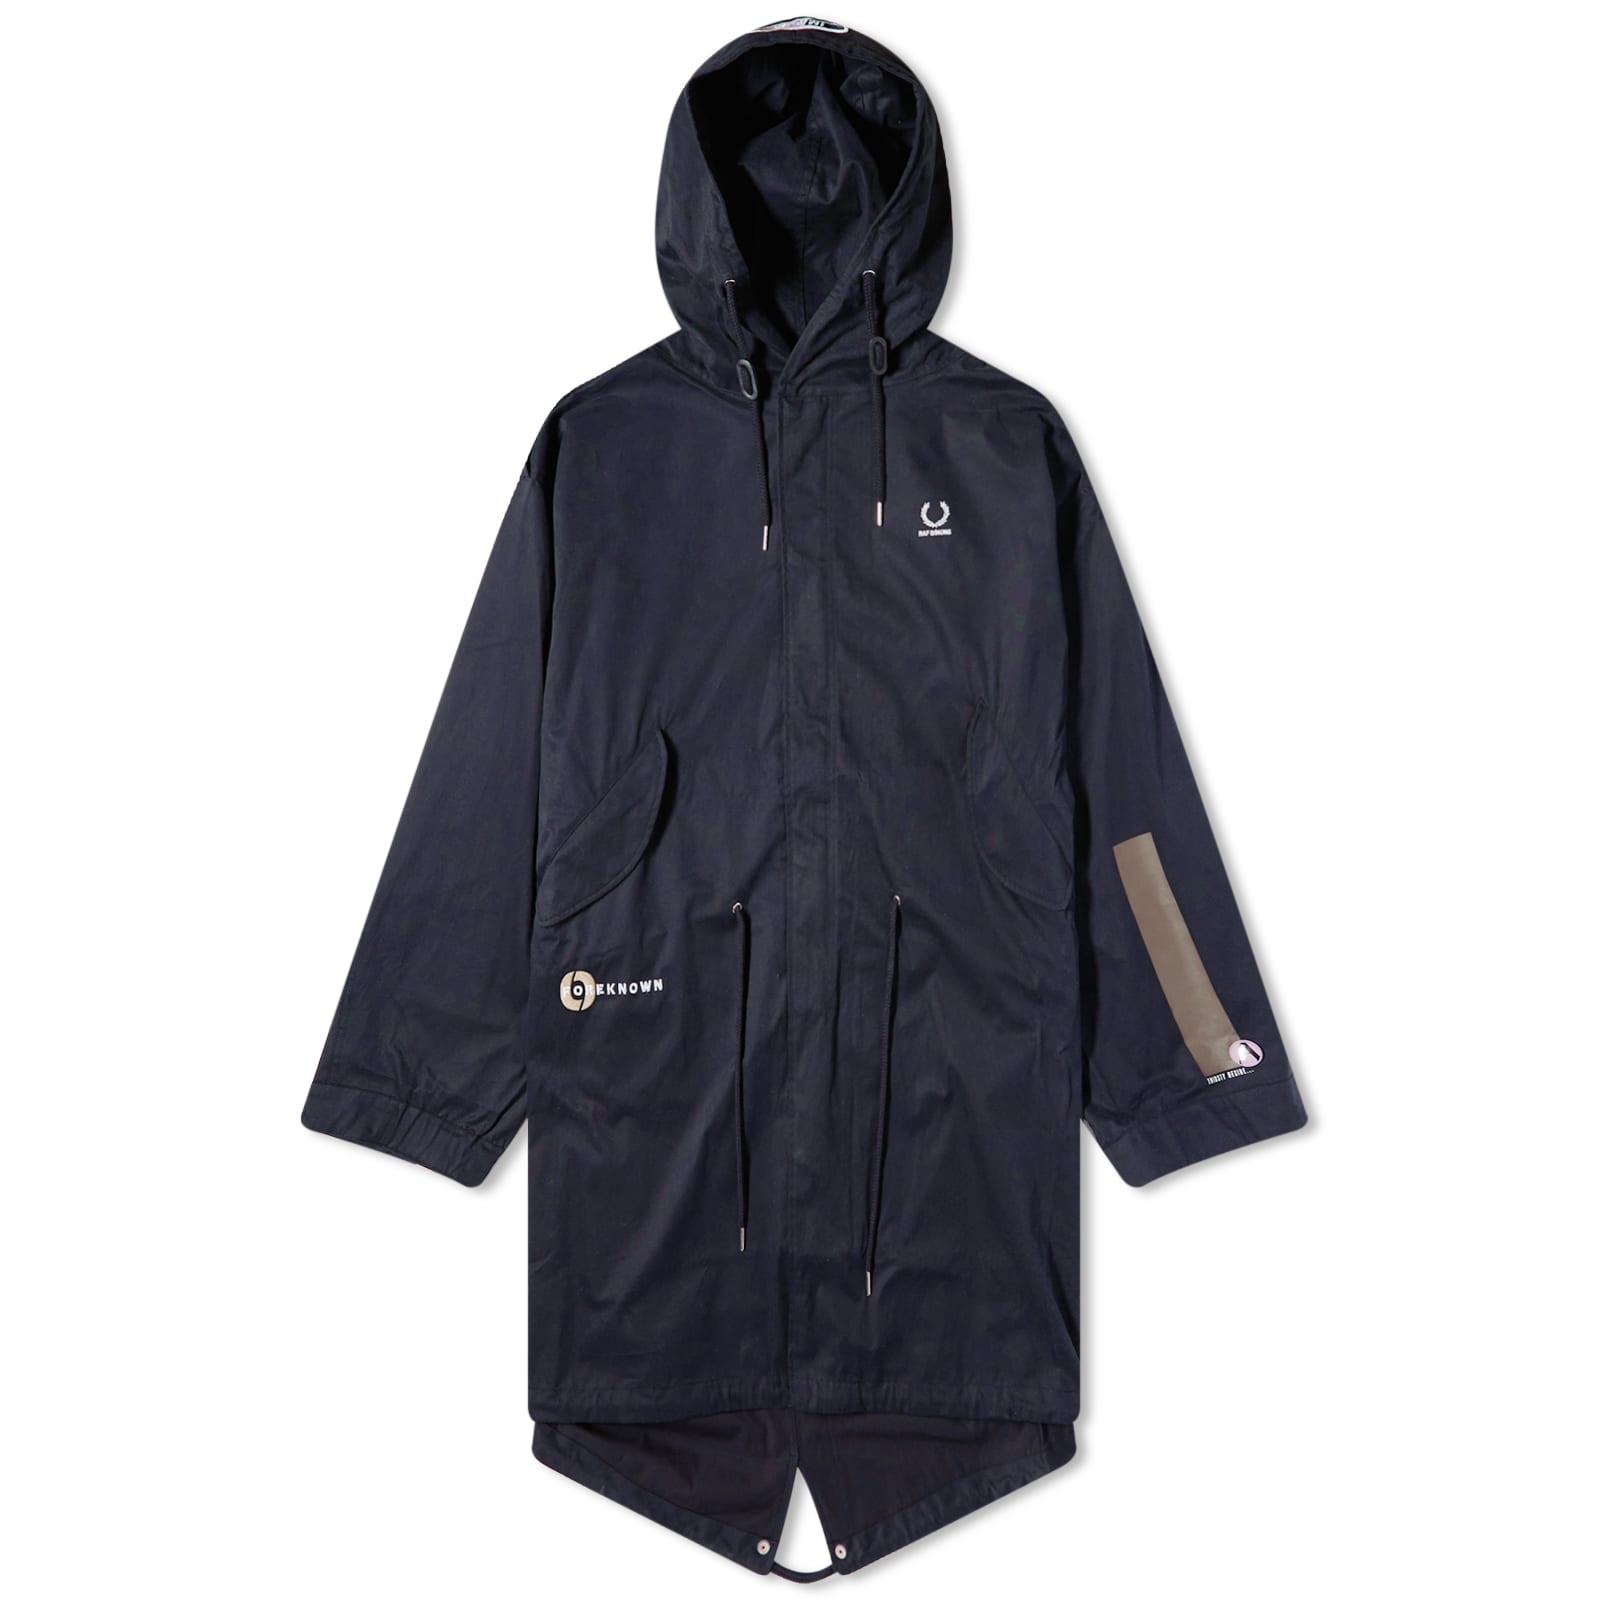 Fred Perry x Raf Simons Printed Patch Parka - 1